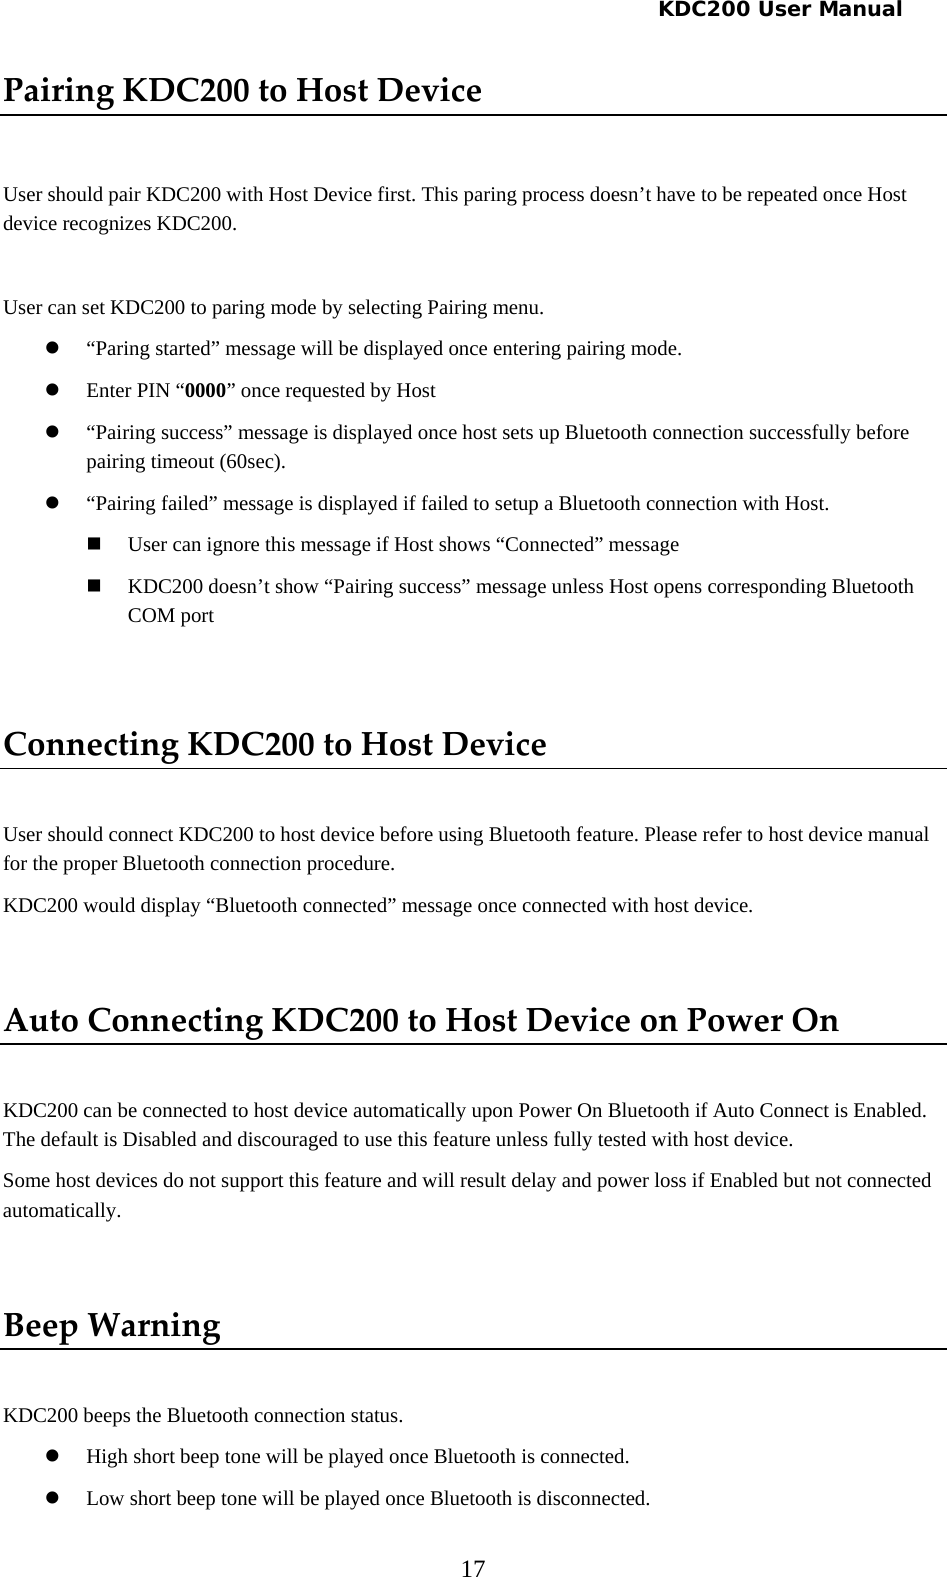   KDC200 User Manual 17 PairingKDC200toHostDevice User should pair KDC200 with Host Device first. This paring process doesn’t have to be repeated once Host device recognizes KDC200.  User can set KDC200 to paring mode by selecting Pairing menu.  z “Paring started” message will be displayed once entering pairing mode. z Enter PIN “0000” once requested by Host z “Pairing success” message is displayed once host sets up Bluetooth connection successfully before pairing timeout (60sec). z “Pairing failed” message is displayed if failed to setup a Bluetooth connection with Host.  User can ignore this message if Host shows “Connected” message  KDC200 doesn’t show “Pairing success” message unless Host opens corresponding Bluetooth COM port  ConnectingKDC200toHostDevice User should connect KDC200 to host device before using Bluetooth feature. Please refer to host device manual for the proper Bluetooth connection procedure. KDC200 would display “Bluetooth connected” message once connected with host device.  AutoConnectingKDC200toHostDeviceonPowerOn KDC200 can be connected to host device automatically upon Power On Bluetooth if Auto Connect is Enabled. The default is Disabled and discouraged to use this feature unless fully tested with host device.  Some host devices do not support this feature and will result delay and power loss if Enabled but not connected automatically.  BeepWarning KDC200 beeps the Bluetooth connection status. z High short beep tone will be played once Bluetooth is connected. z Low short beep tone will be played once Bluetooth is disconnected. 